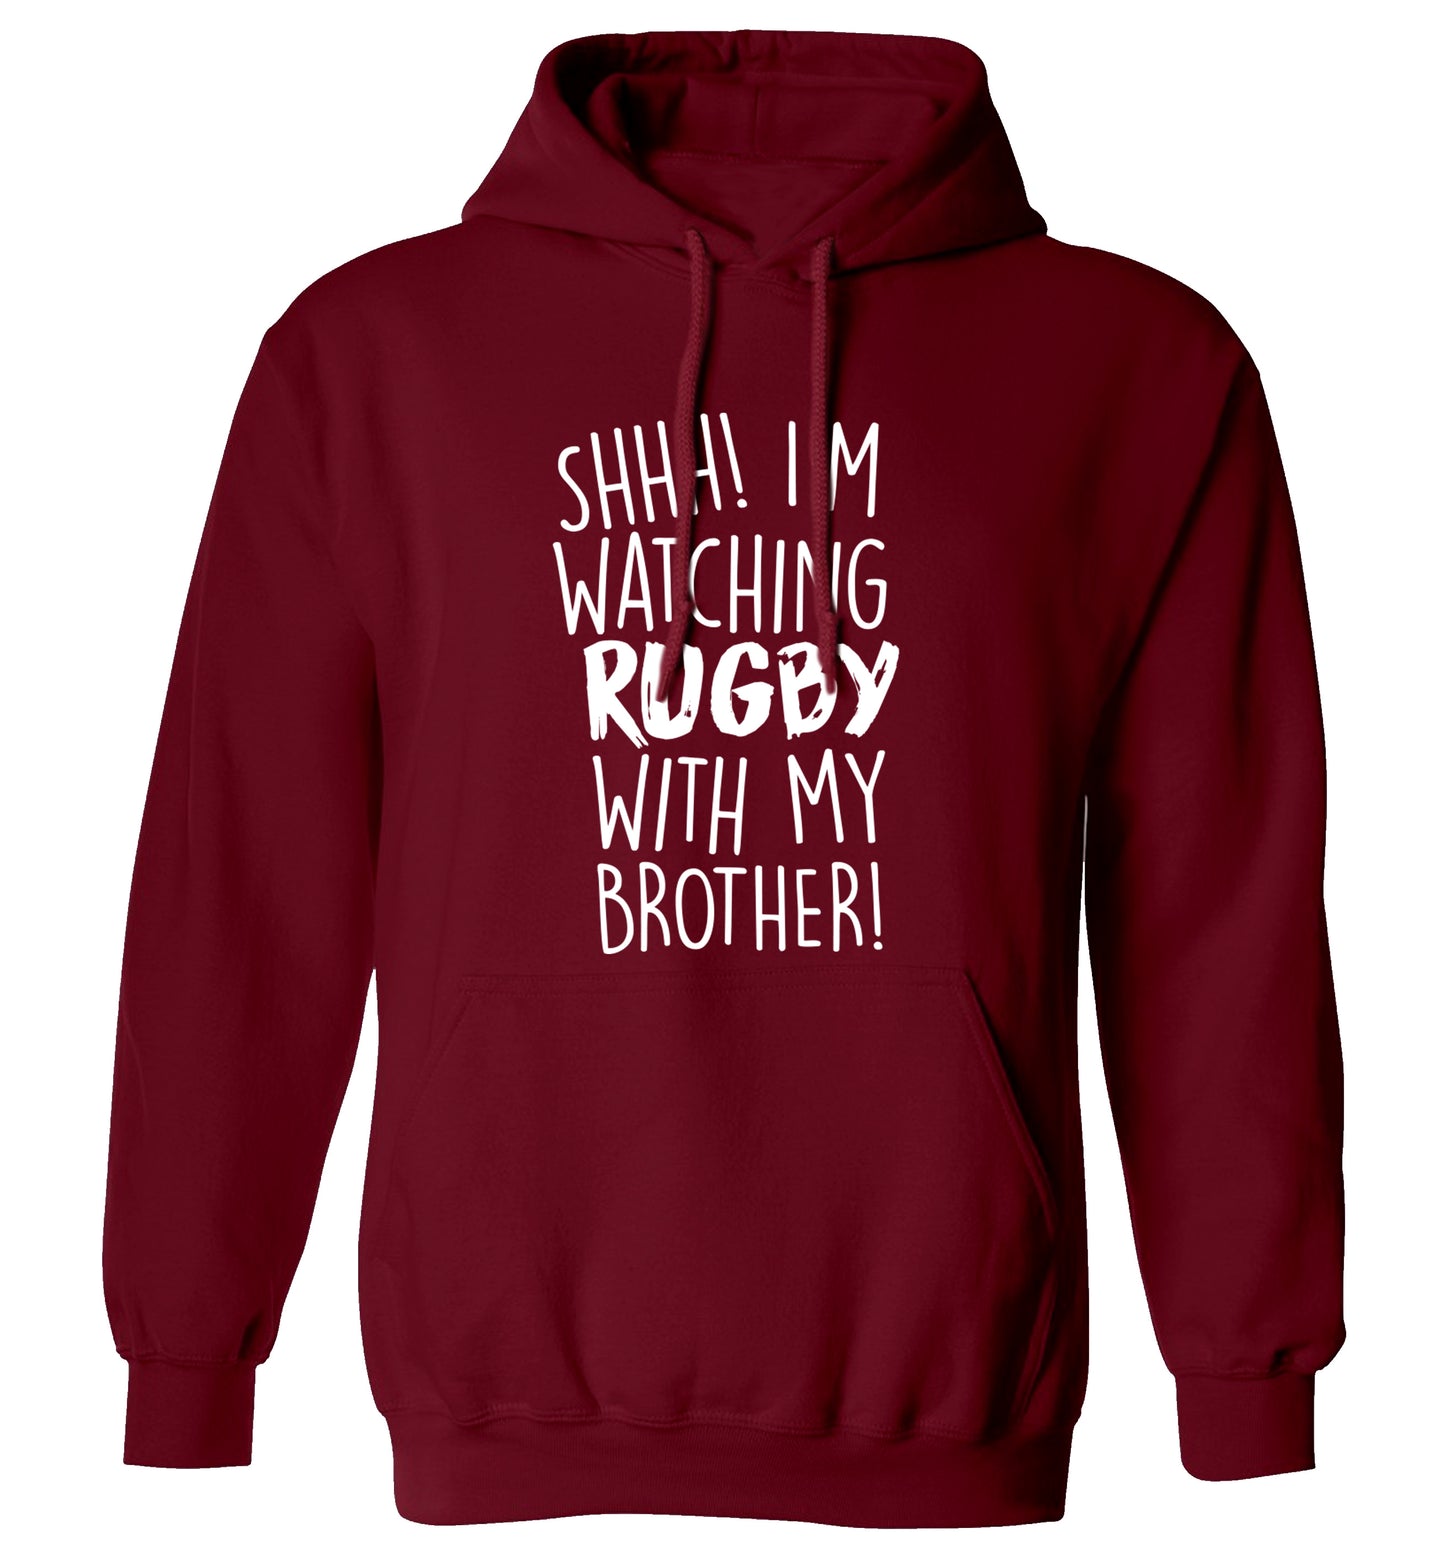 Shh... I'm watching rugby with my brother adults unisex maroon hoodie 2XL